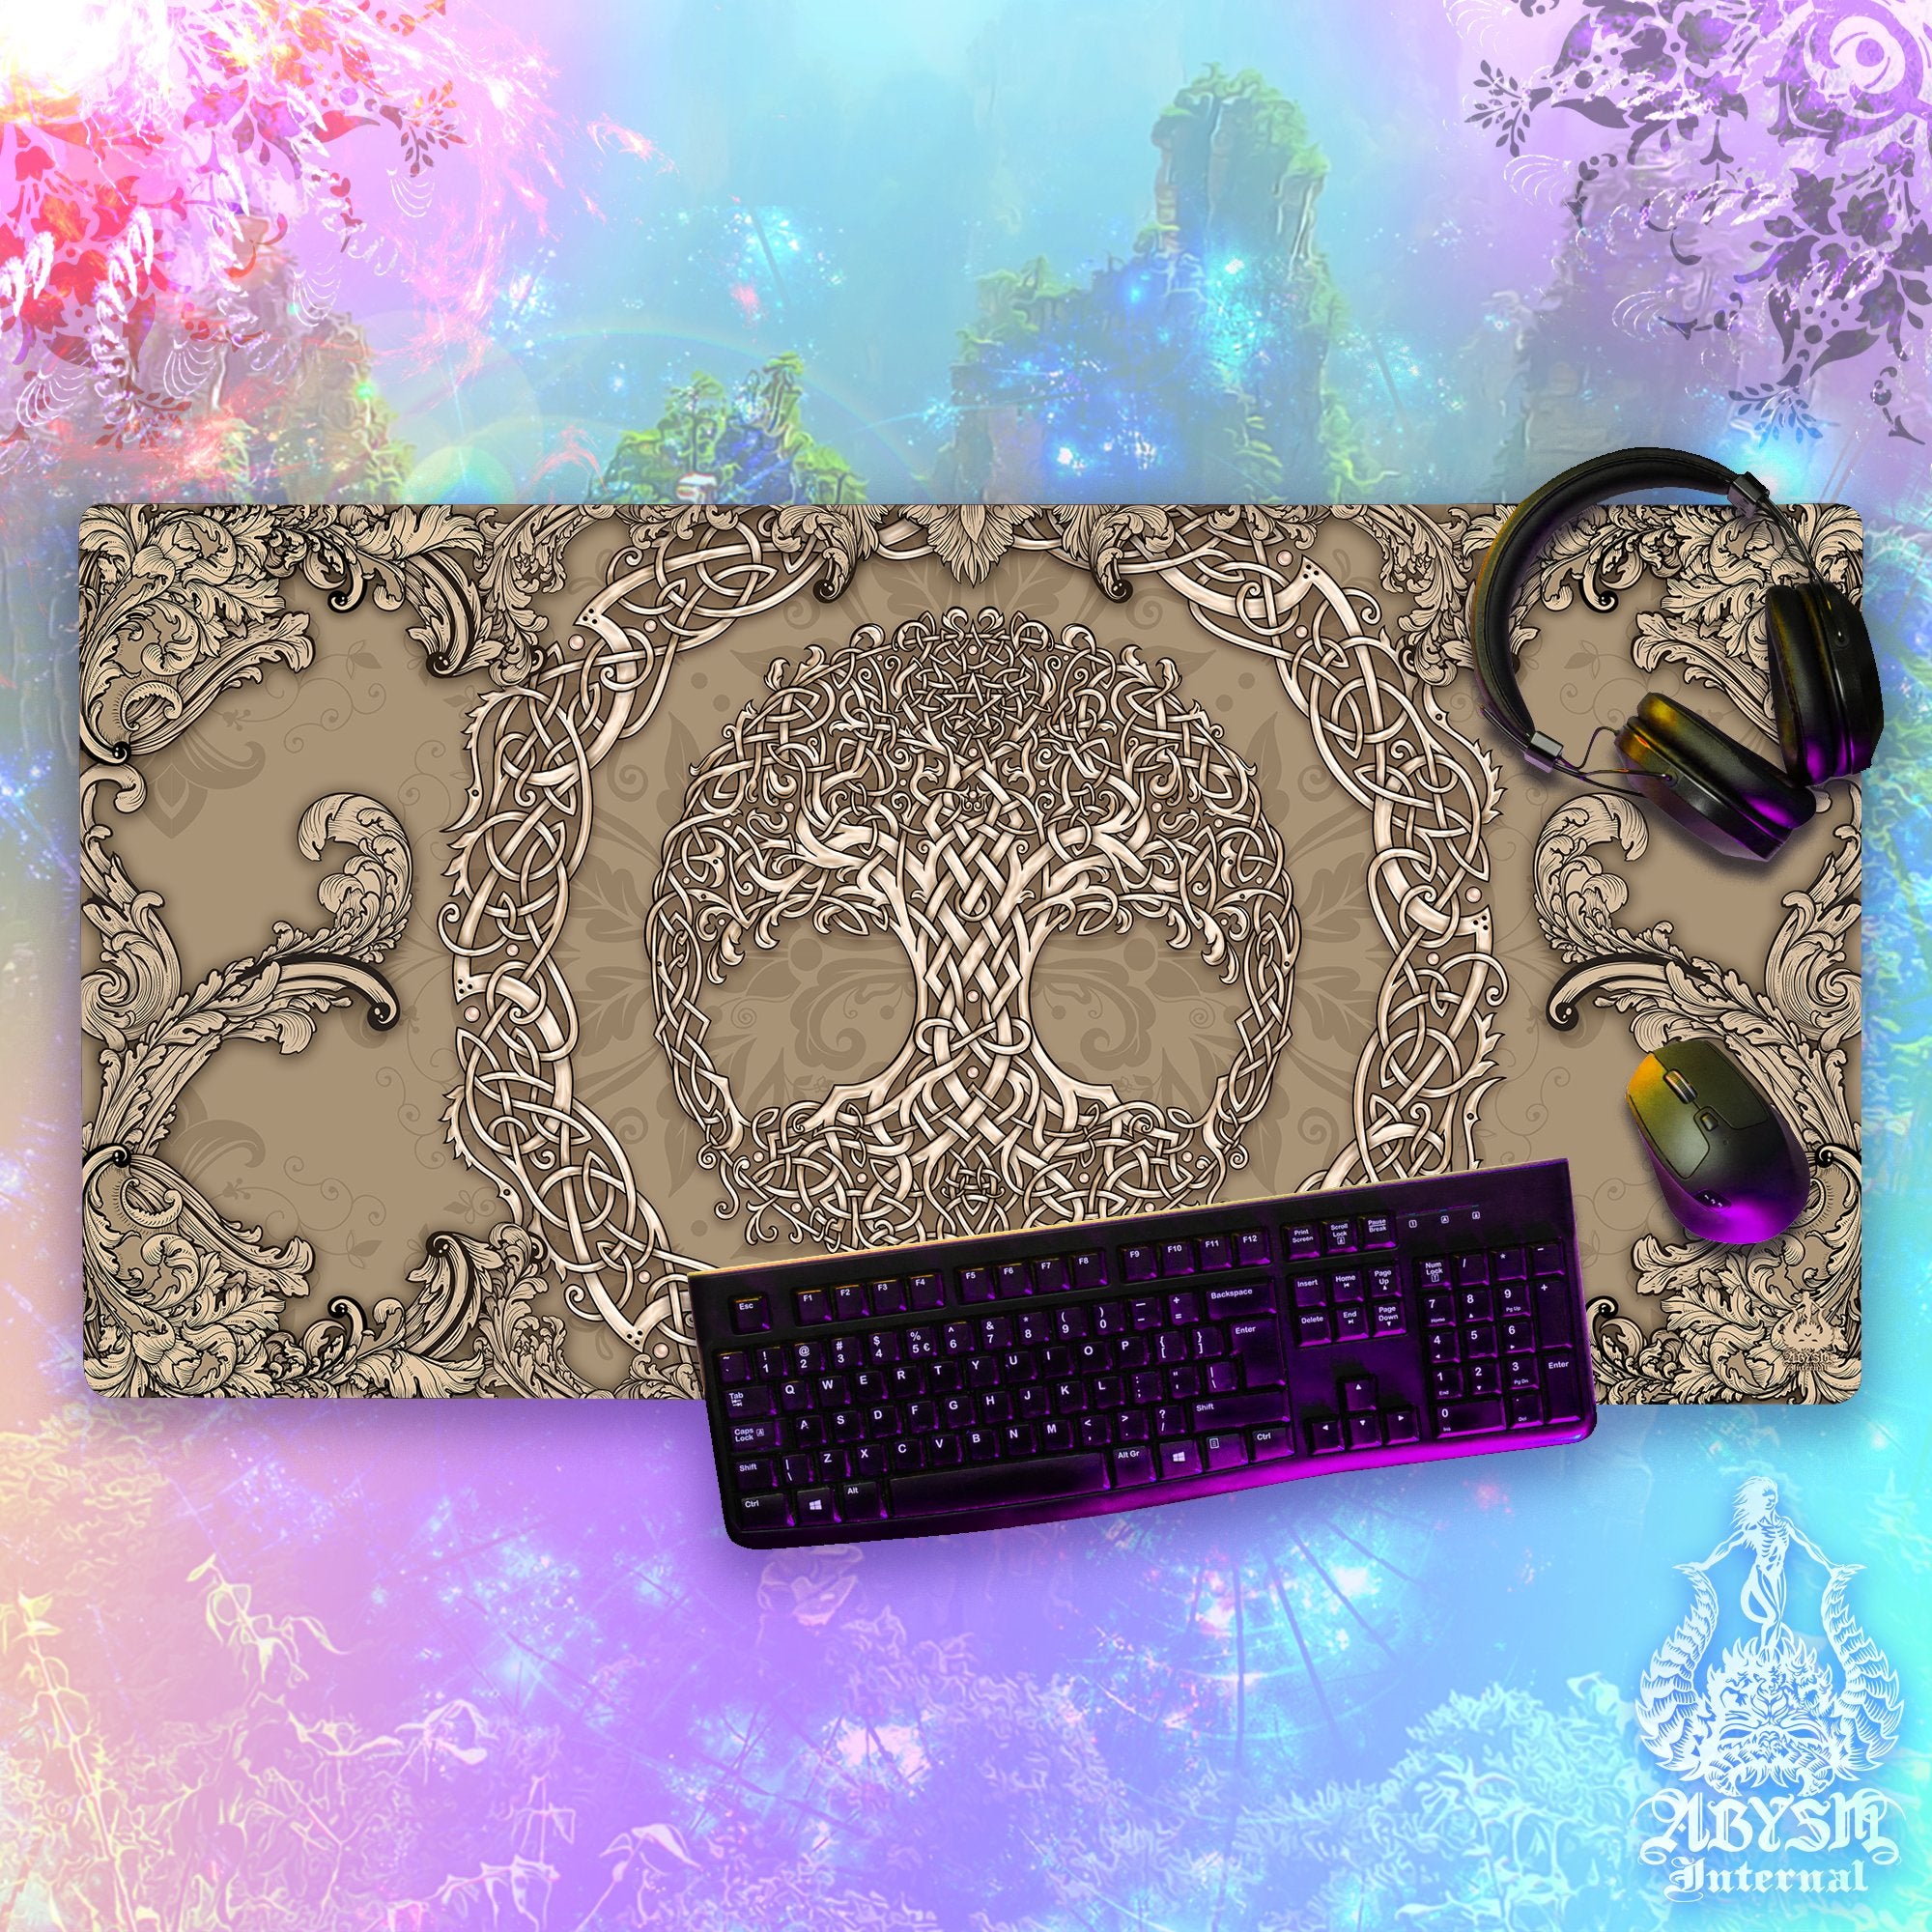 Tree of Life Gaming Desk Mat, Celtic Knotwork Mouse Pad, Wicca Table Protector Cover, Indie Workpad, Indie Art Print - Cream - Abysm Internal